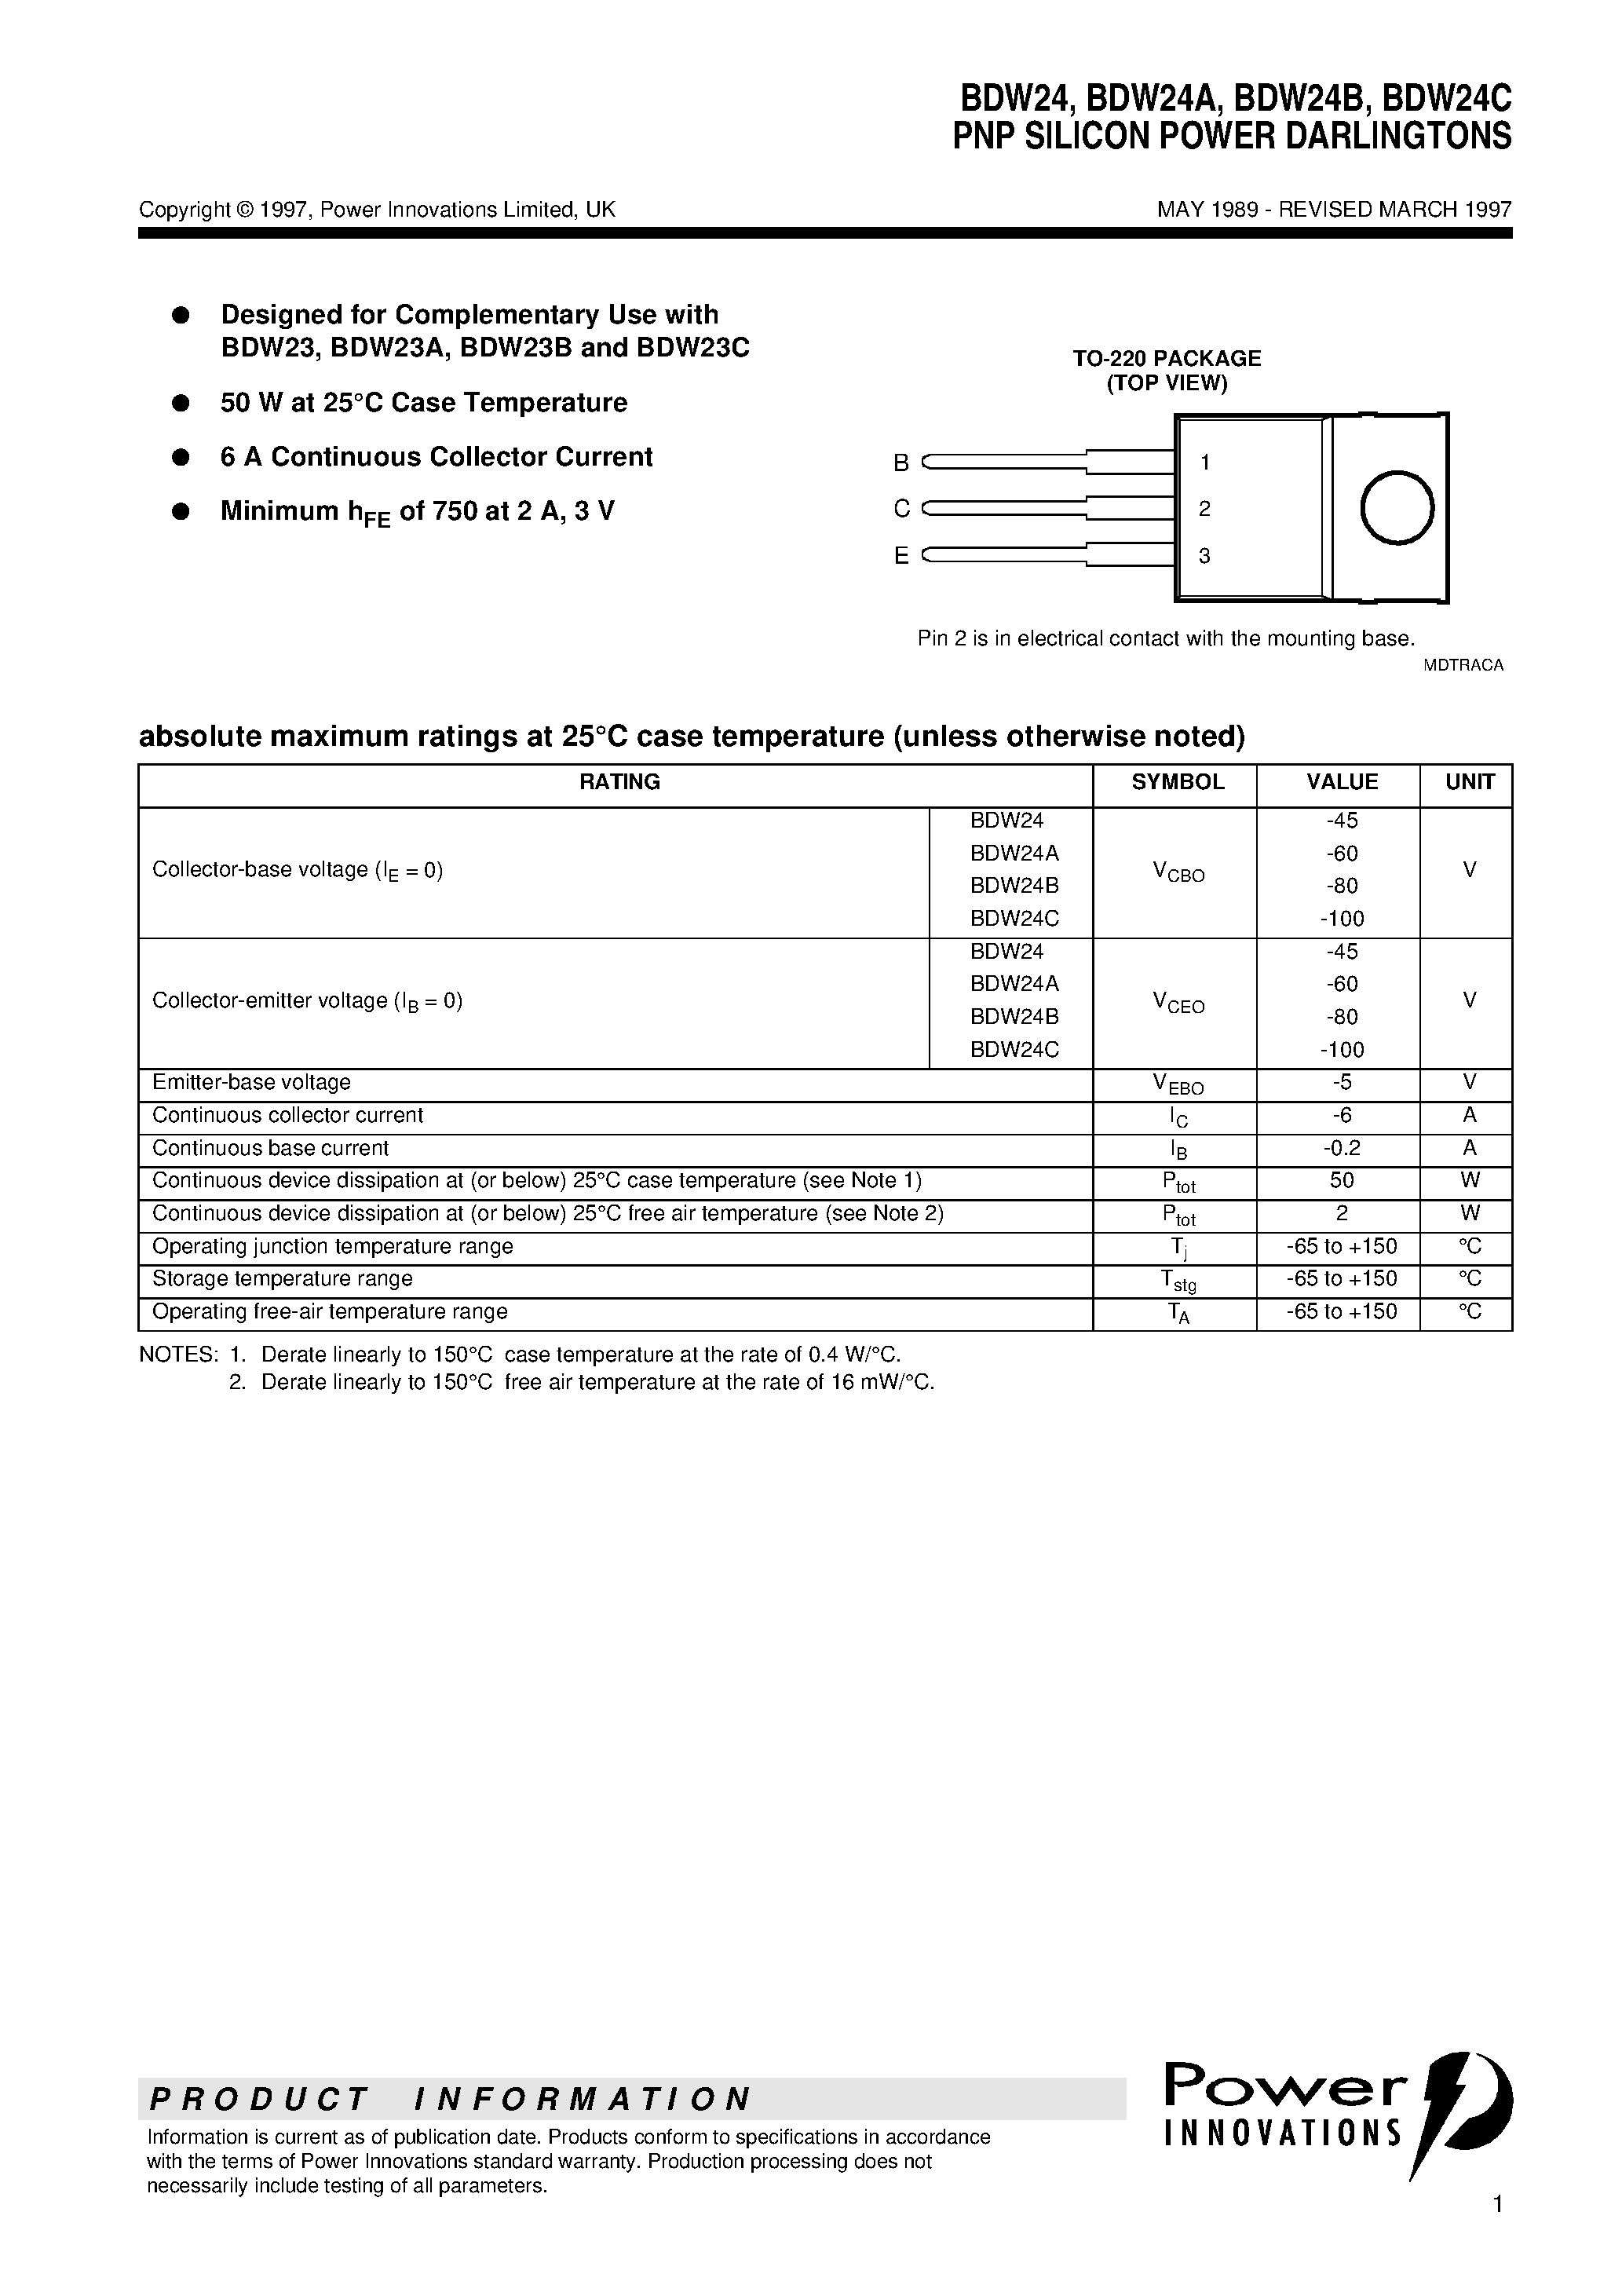 Datasheet BDW24A - PNP SILICON POWER DARLINGTONS page 1